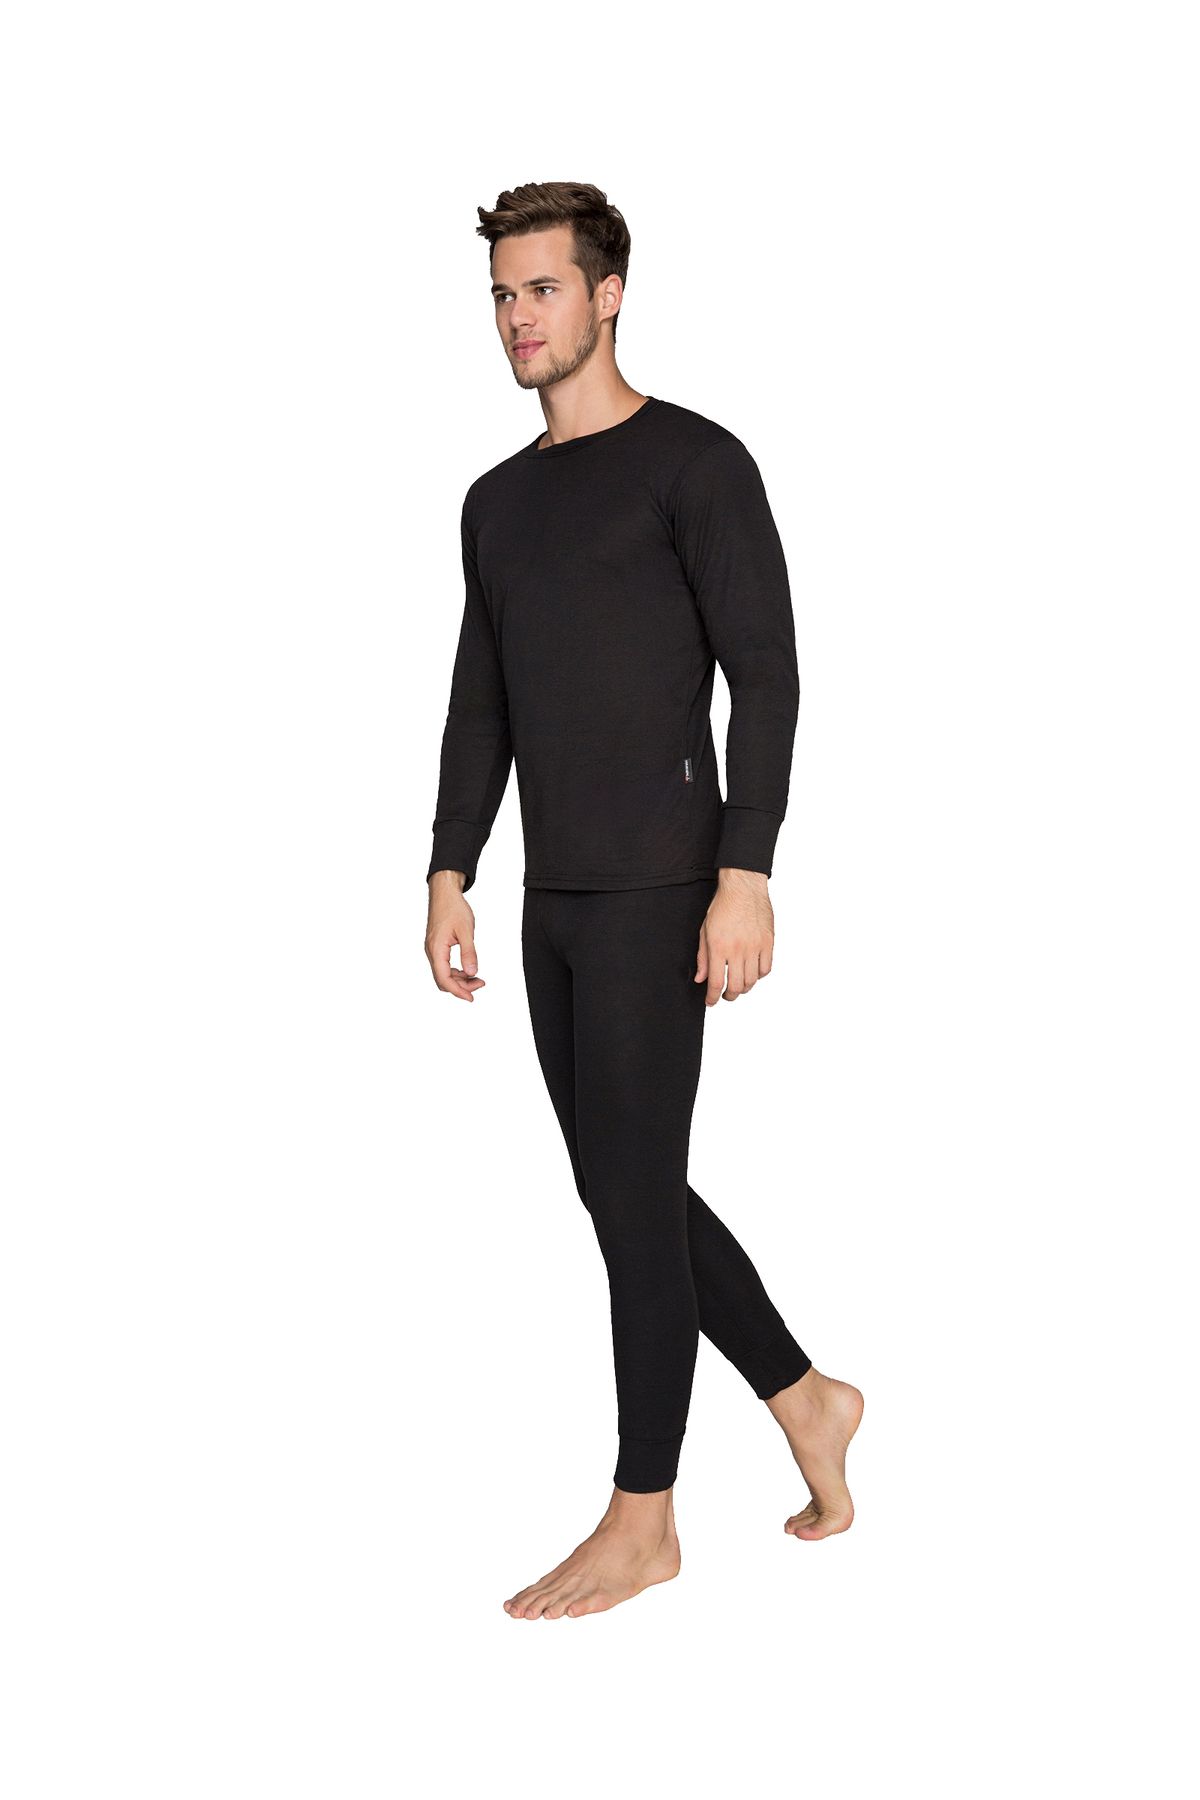 Thermoform Thermal Clothing & Underwear - Black - Cotton